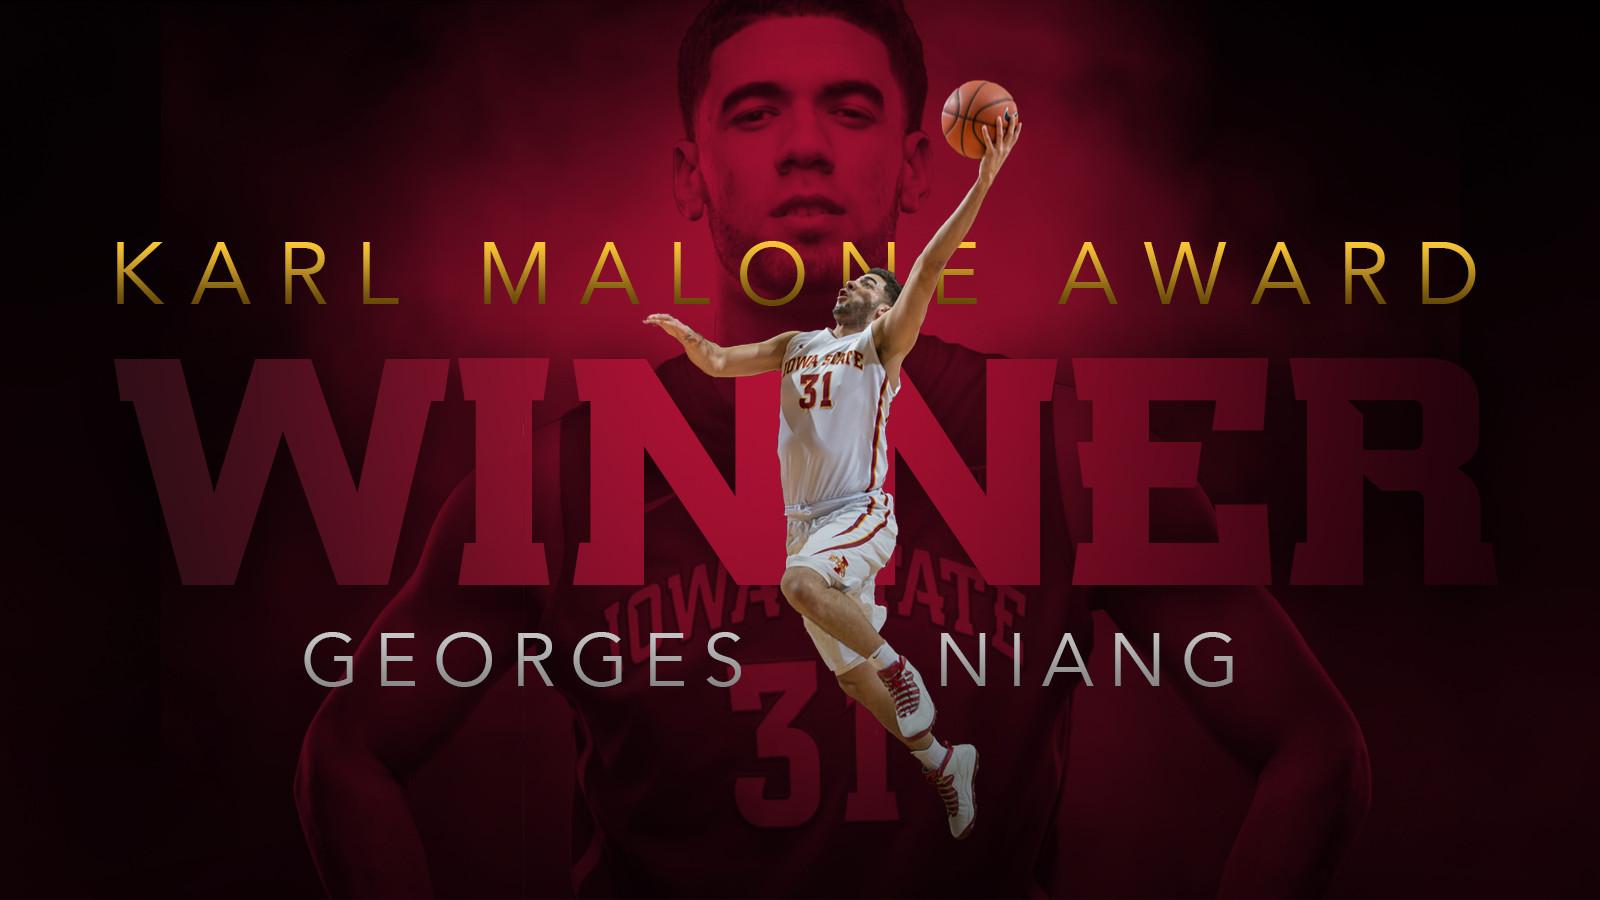 Niang Is Recipient Of Karl Malone Award State University